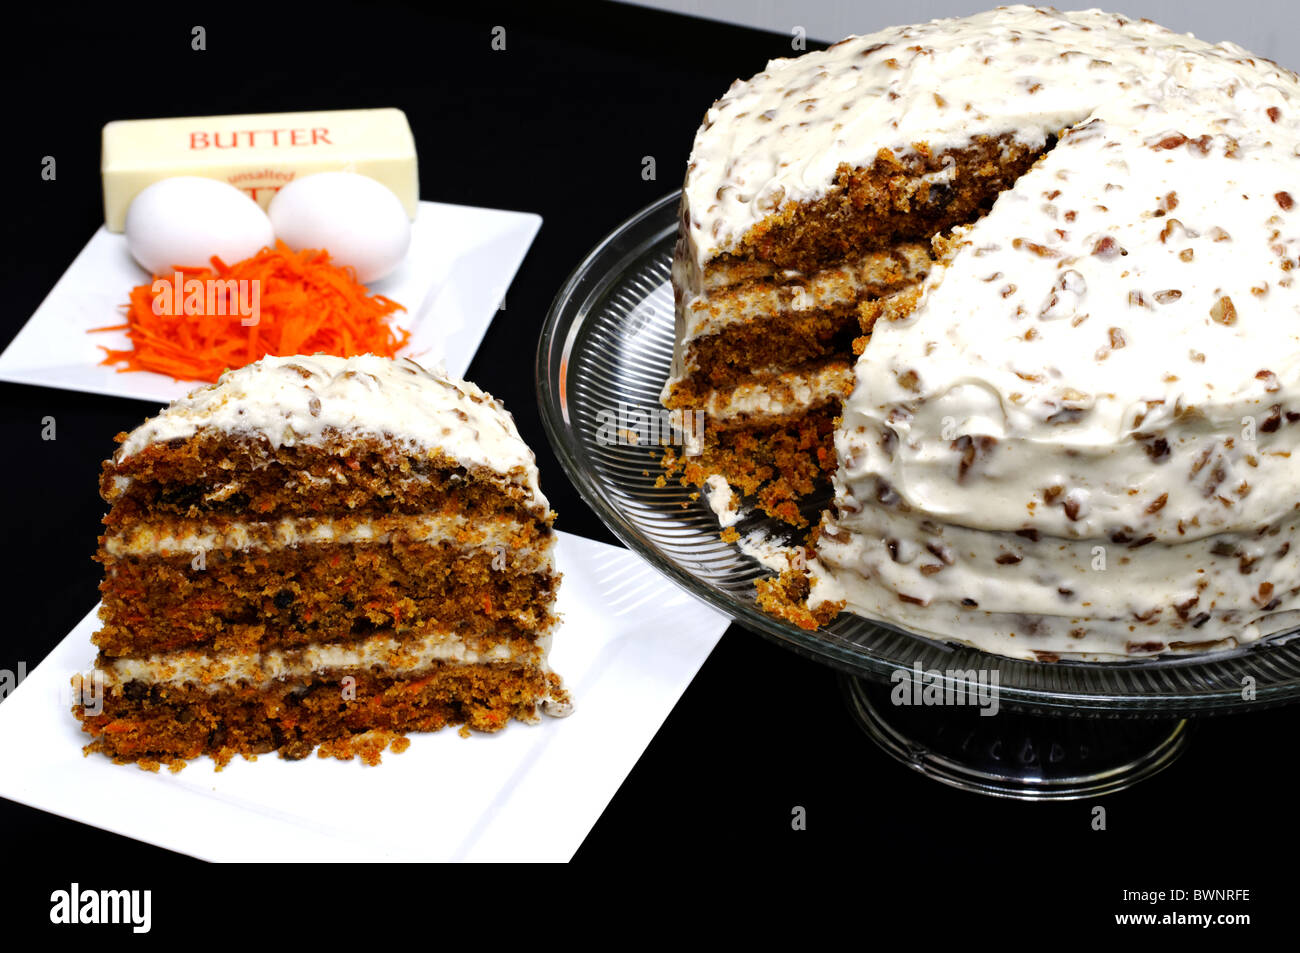 Slice of carrot cake, stick of butter, shredded carrots, and fresh eggs with whole carrot cake. Stock Photo